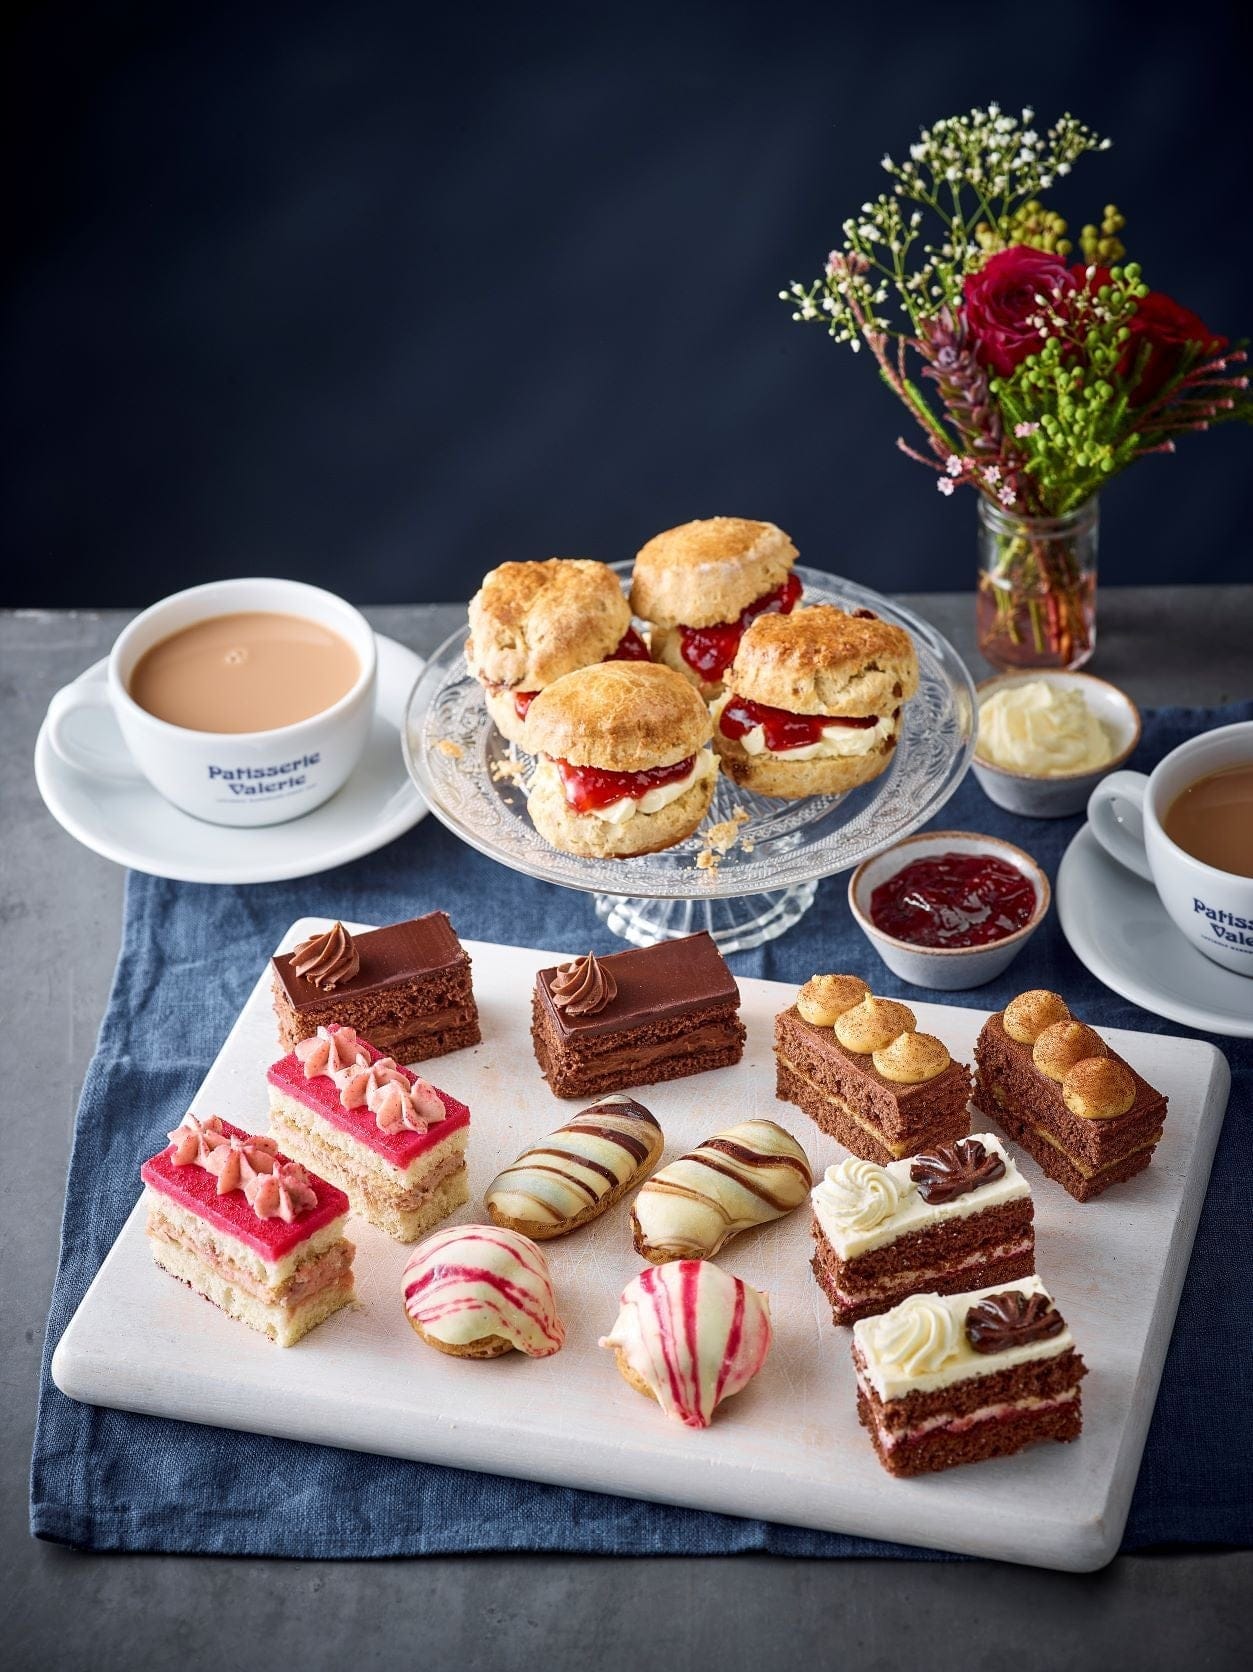 How to throw an afternoon tea party | Good Food